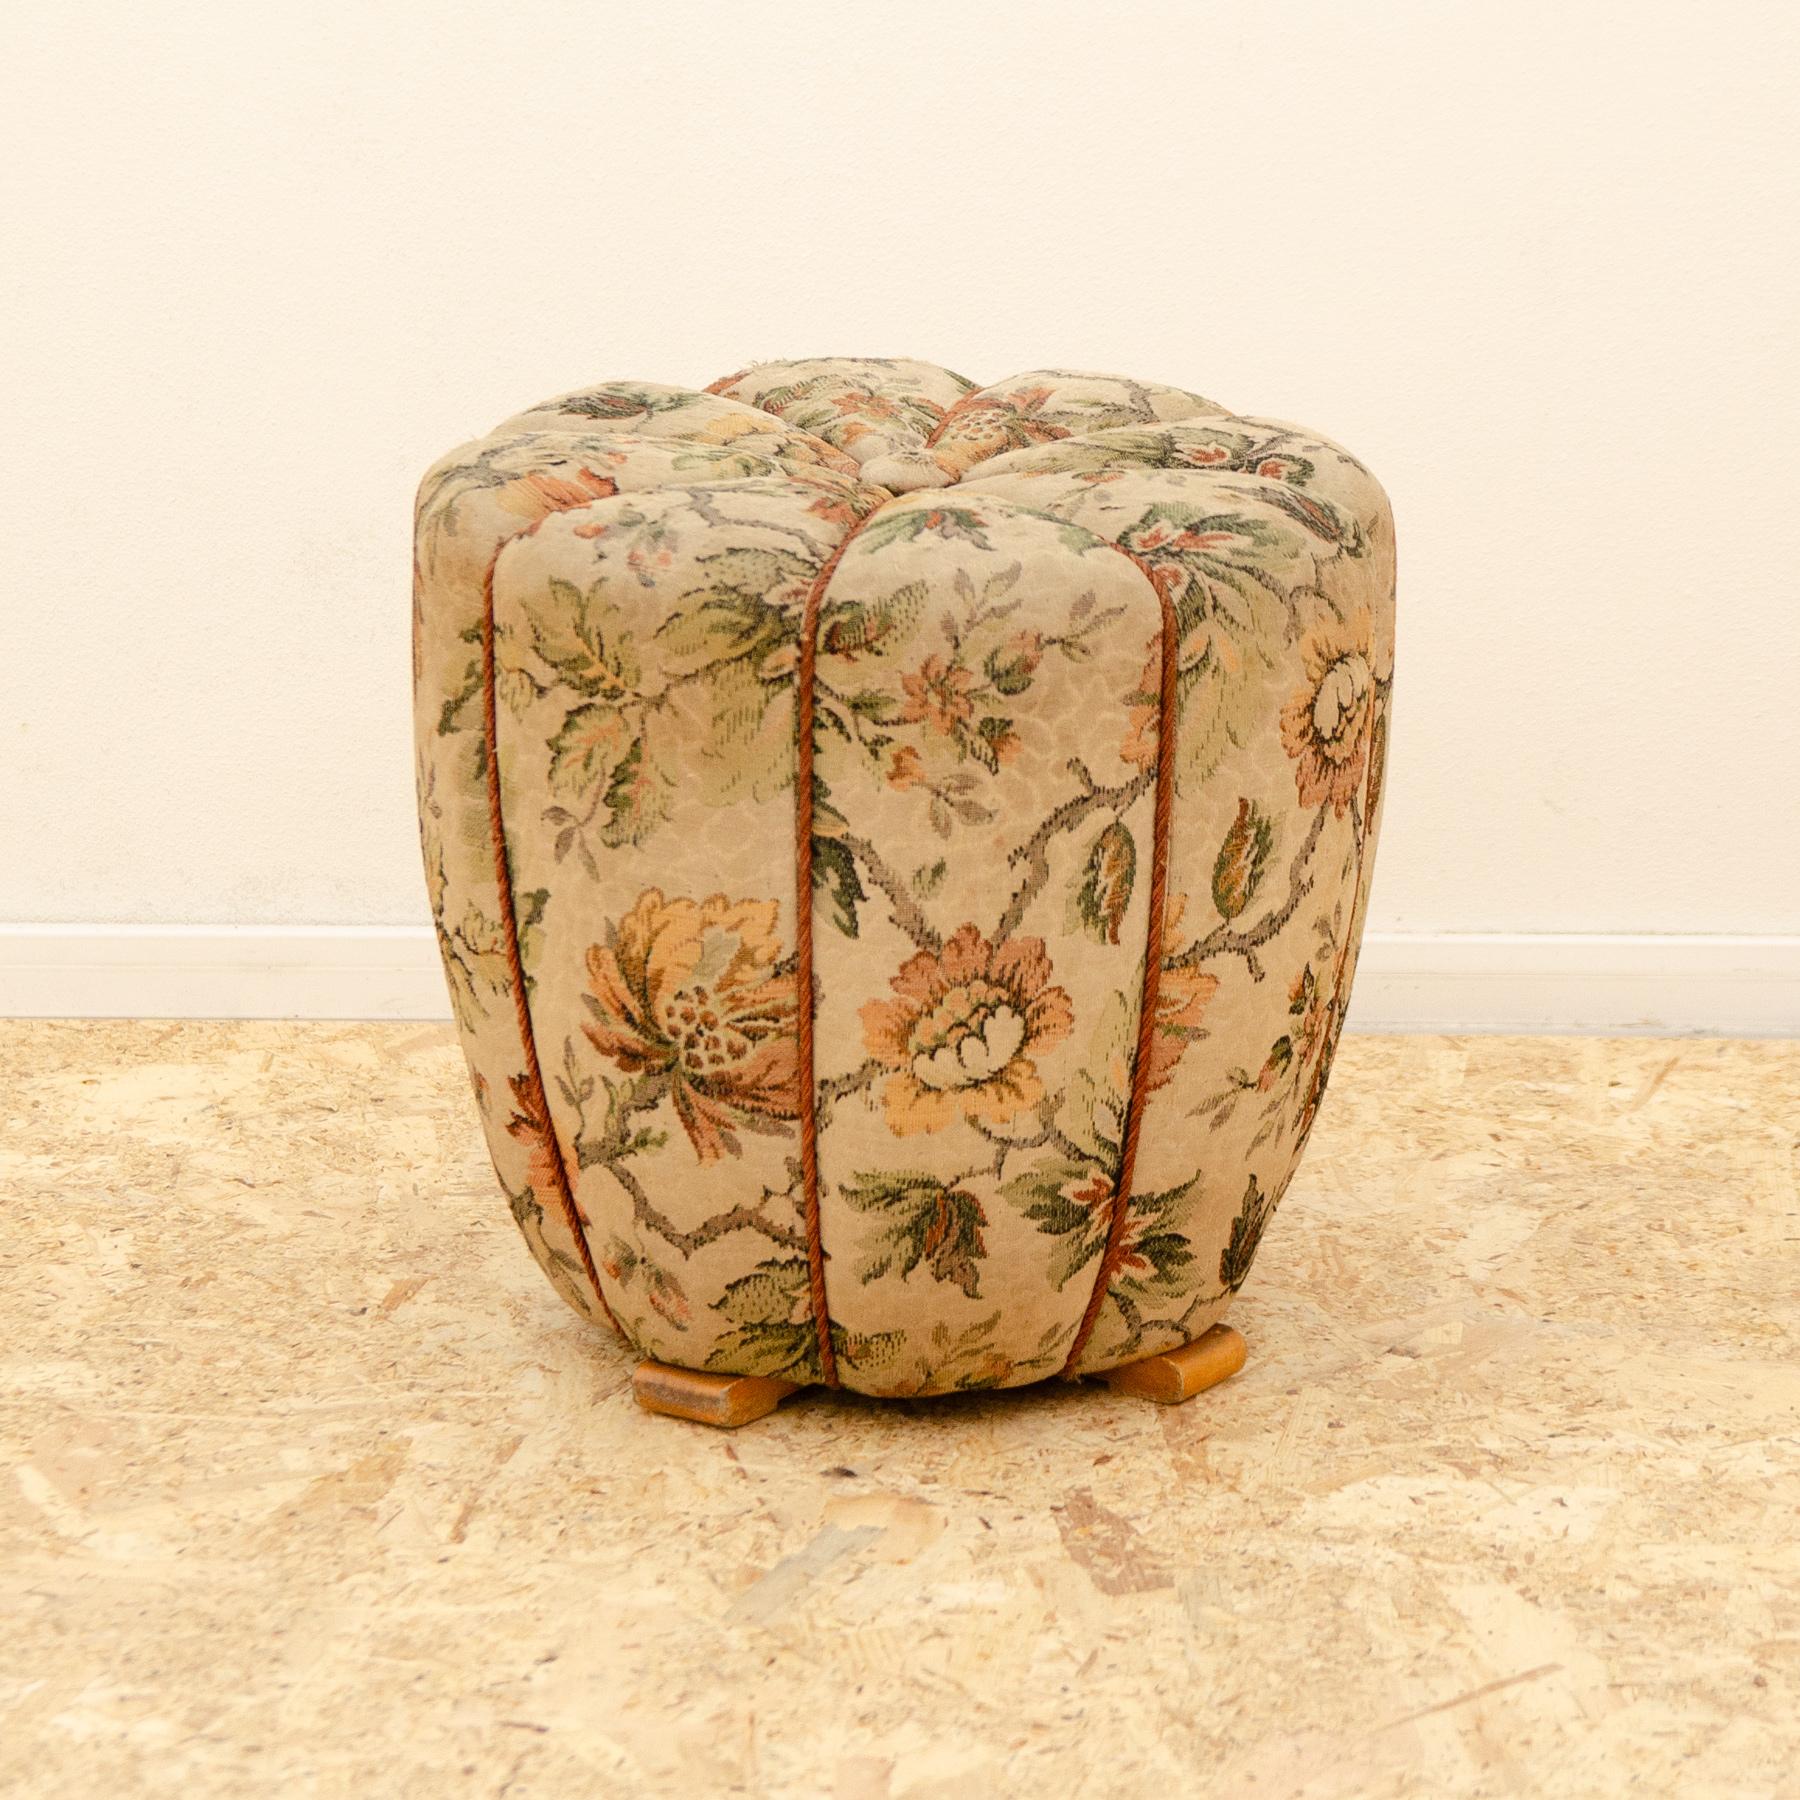 This mid-century pouffe (footstool) was designed by Jindrich Halabala and made by UP Závody in the 1950s. Cool retro chic. The upholstery showing signs of age and using (has a few small scuffs in a few places on the seat). Overall is in good